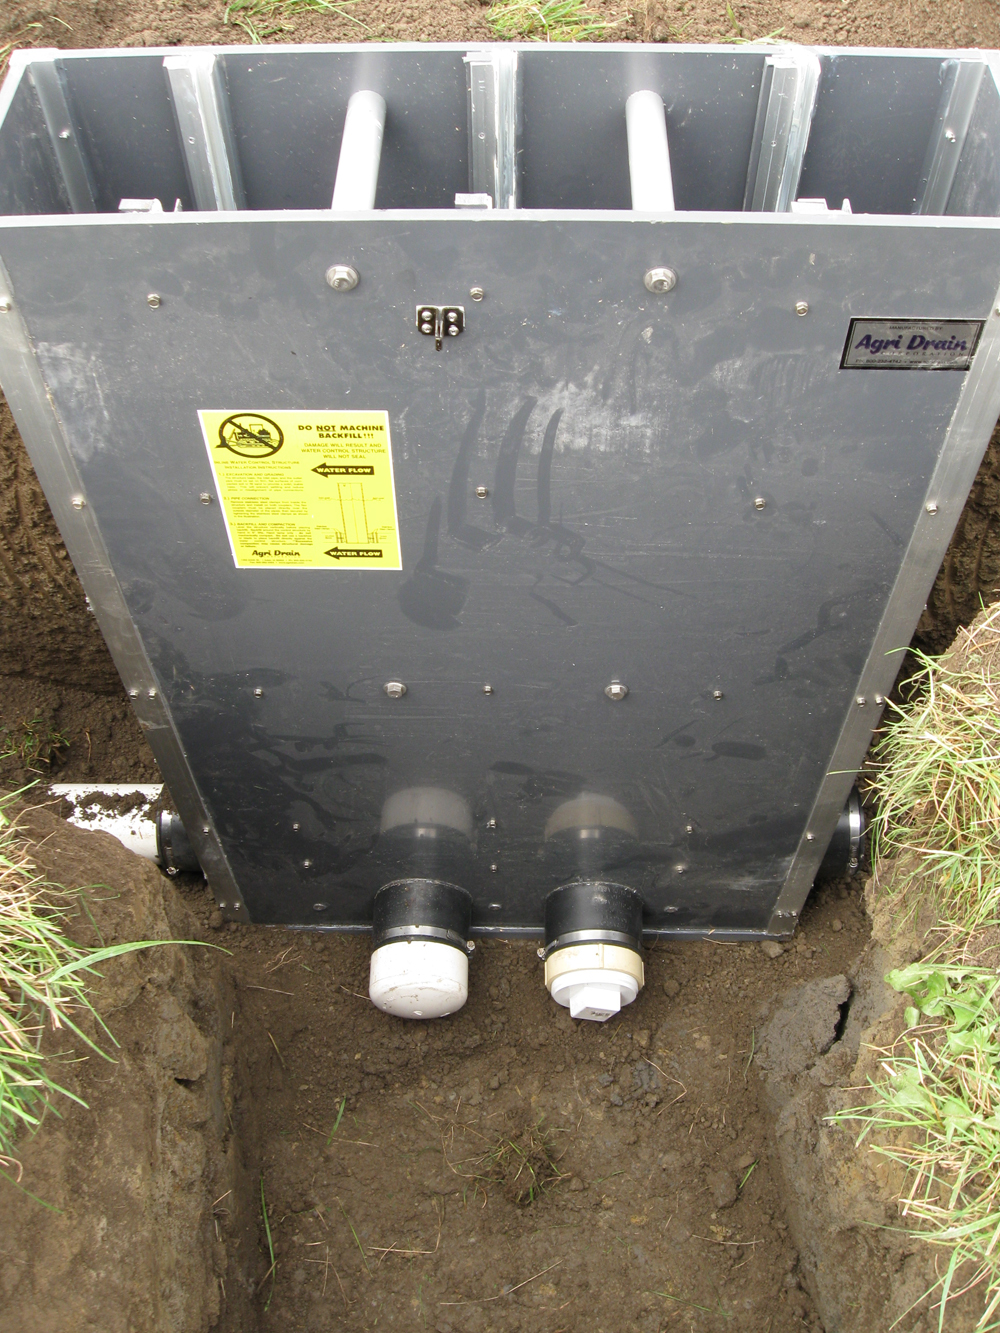 The outlet control structure on a bioreactor in Freevillie, N.Y. (Credit: William Pluer and Larry Geohring)